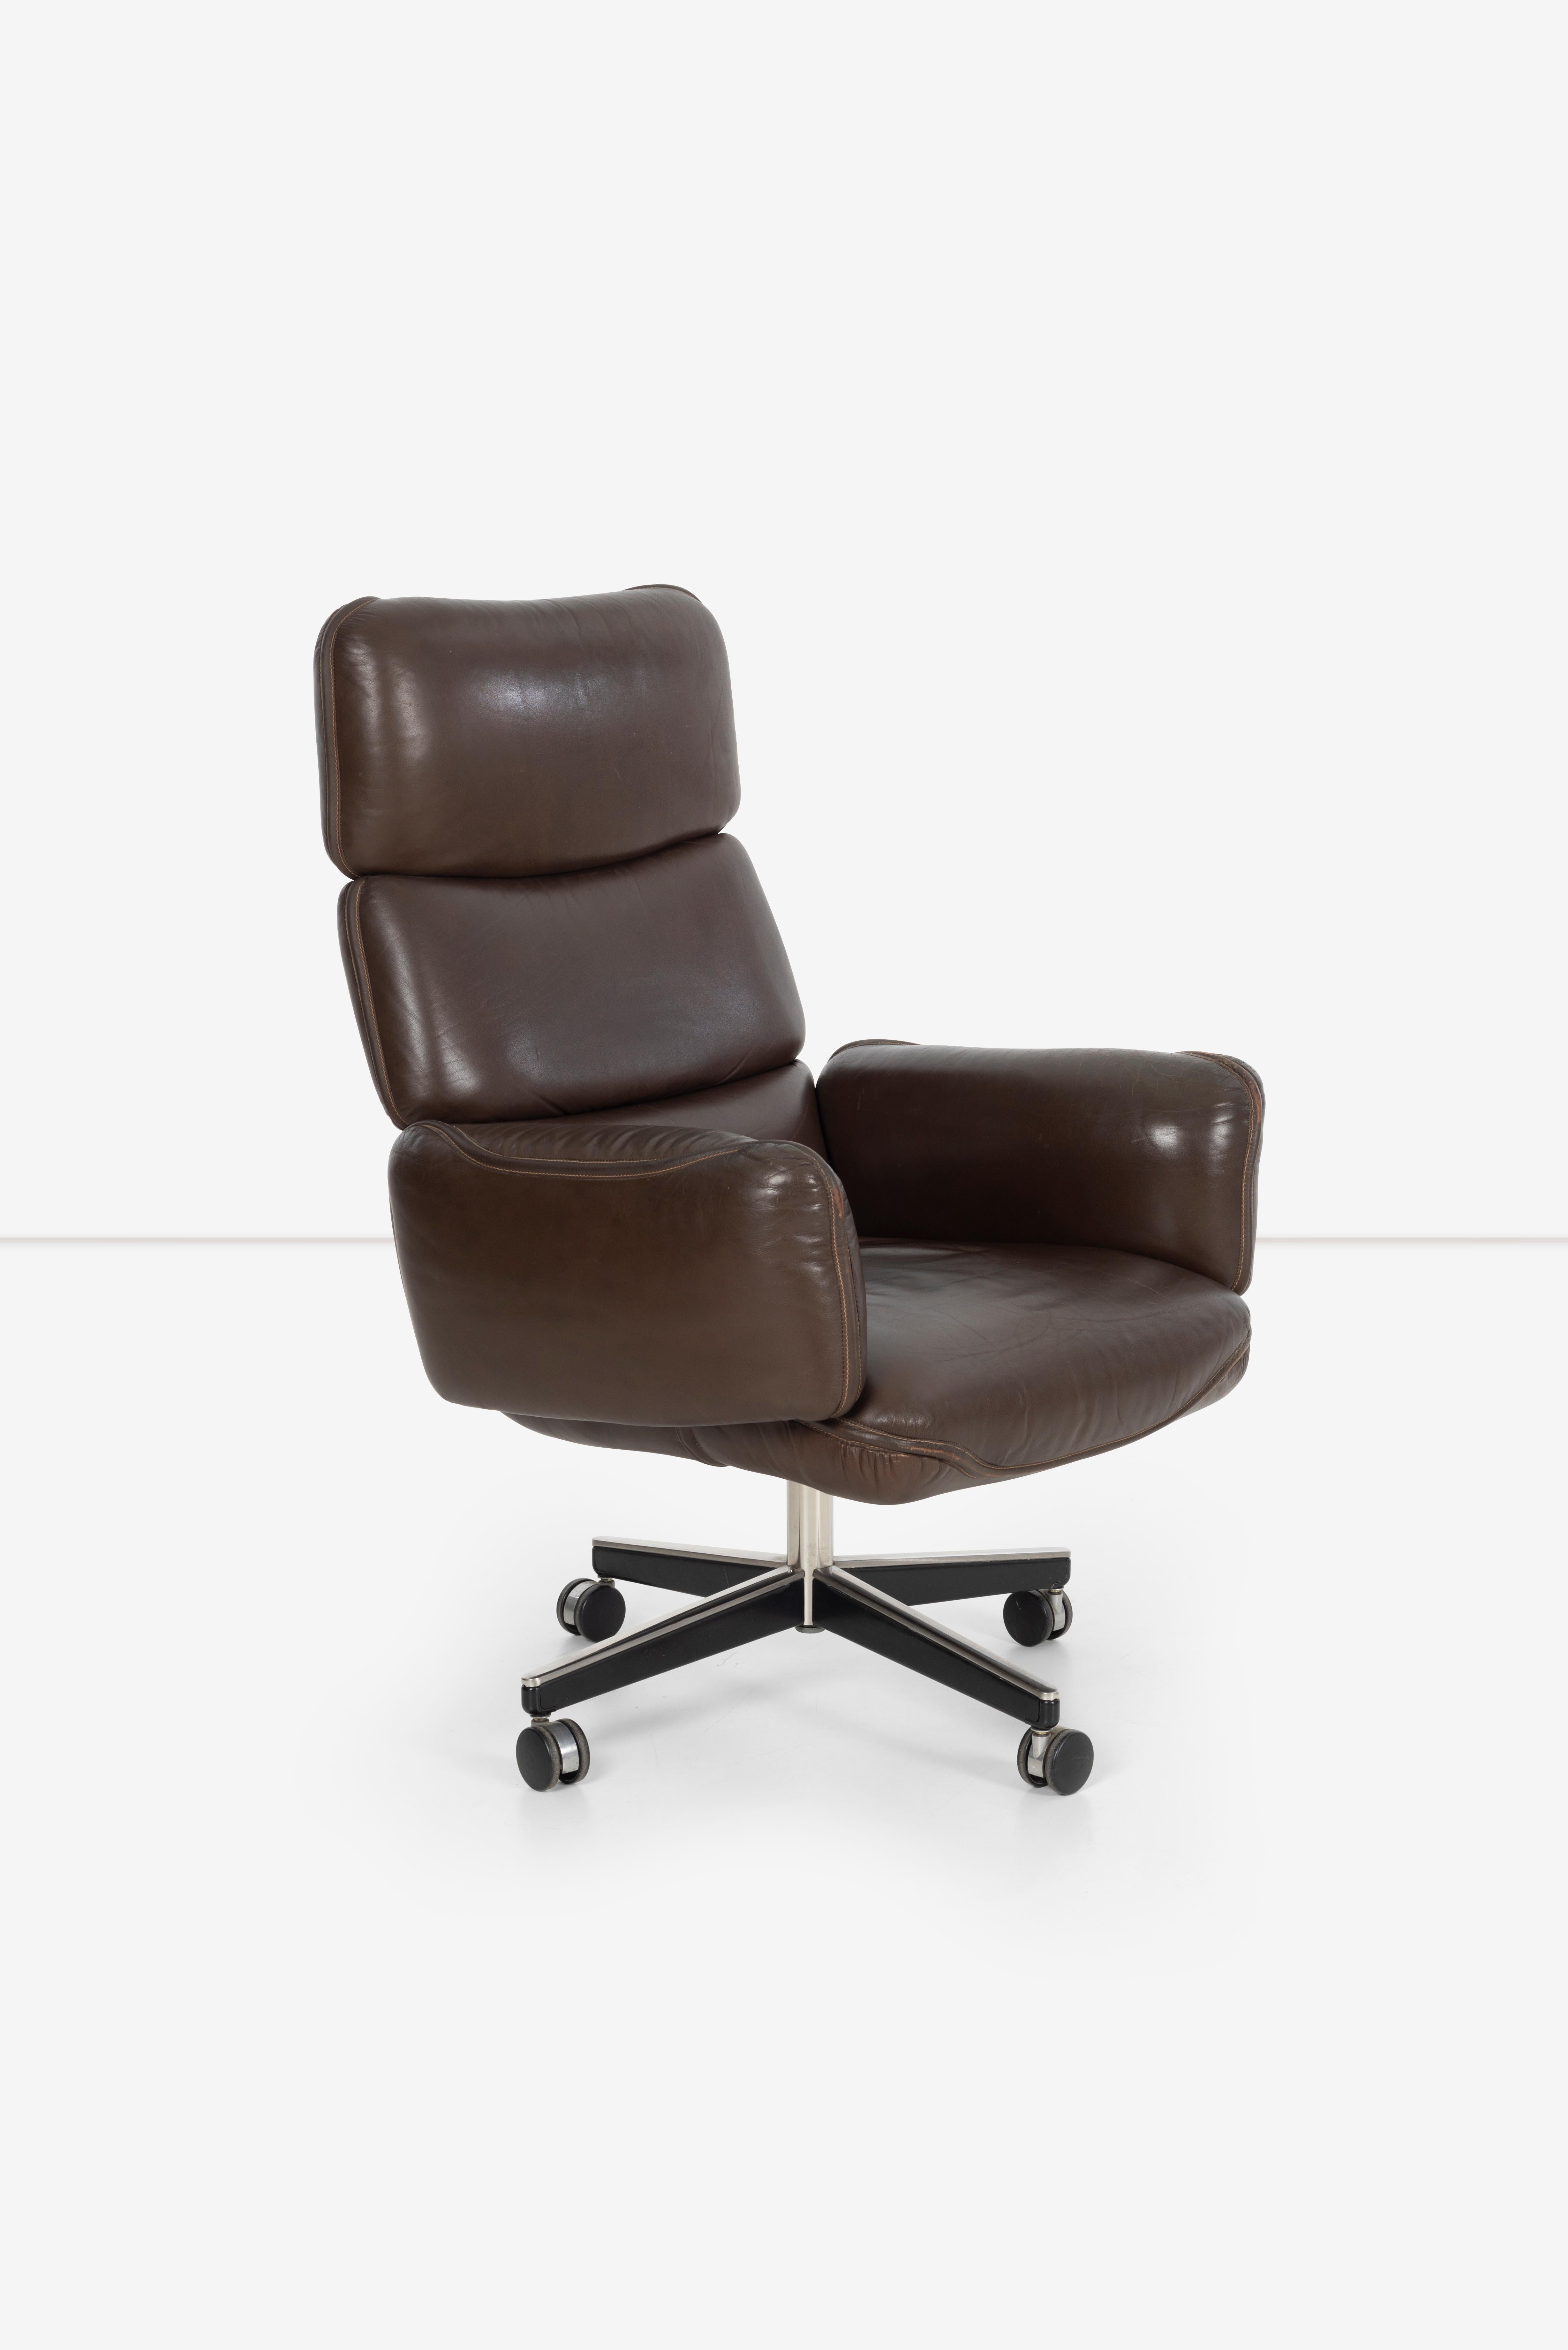 Mid-Century Modern Otto Zapf Executive Chair For Sale